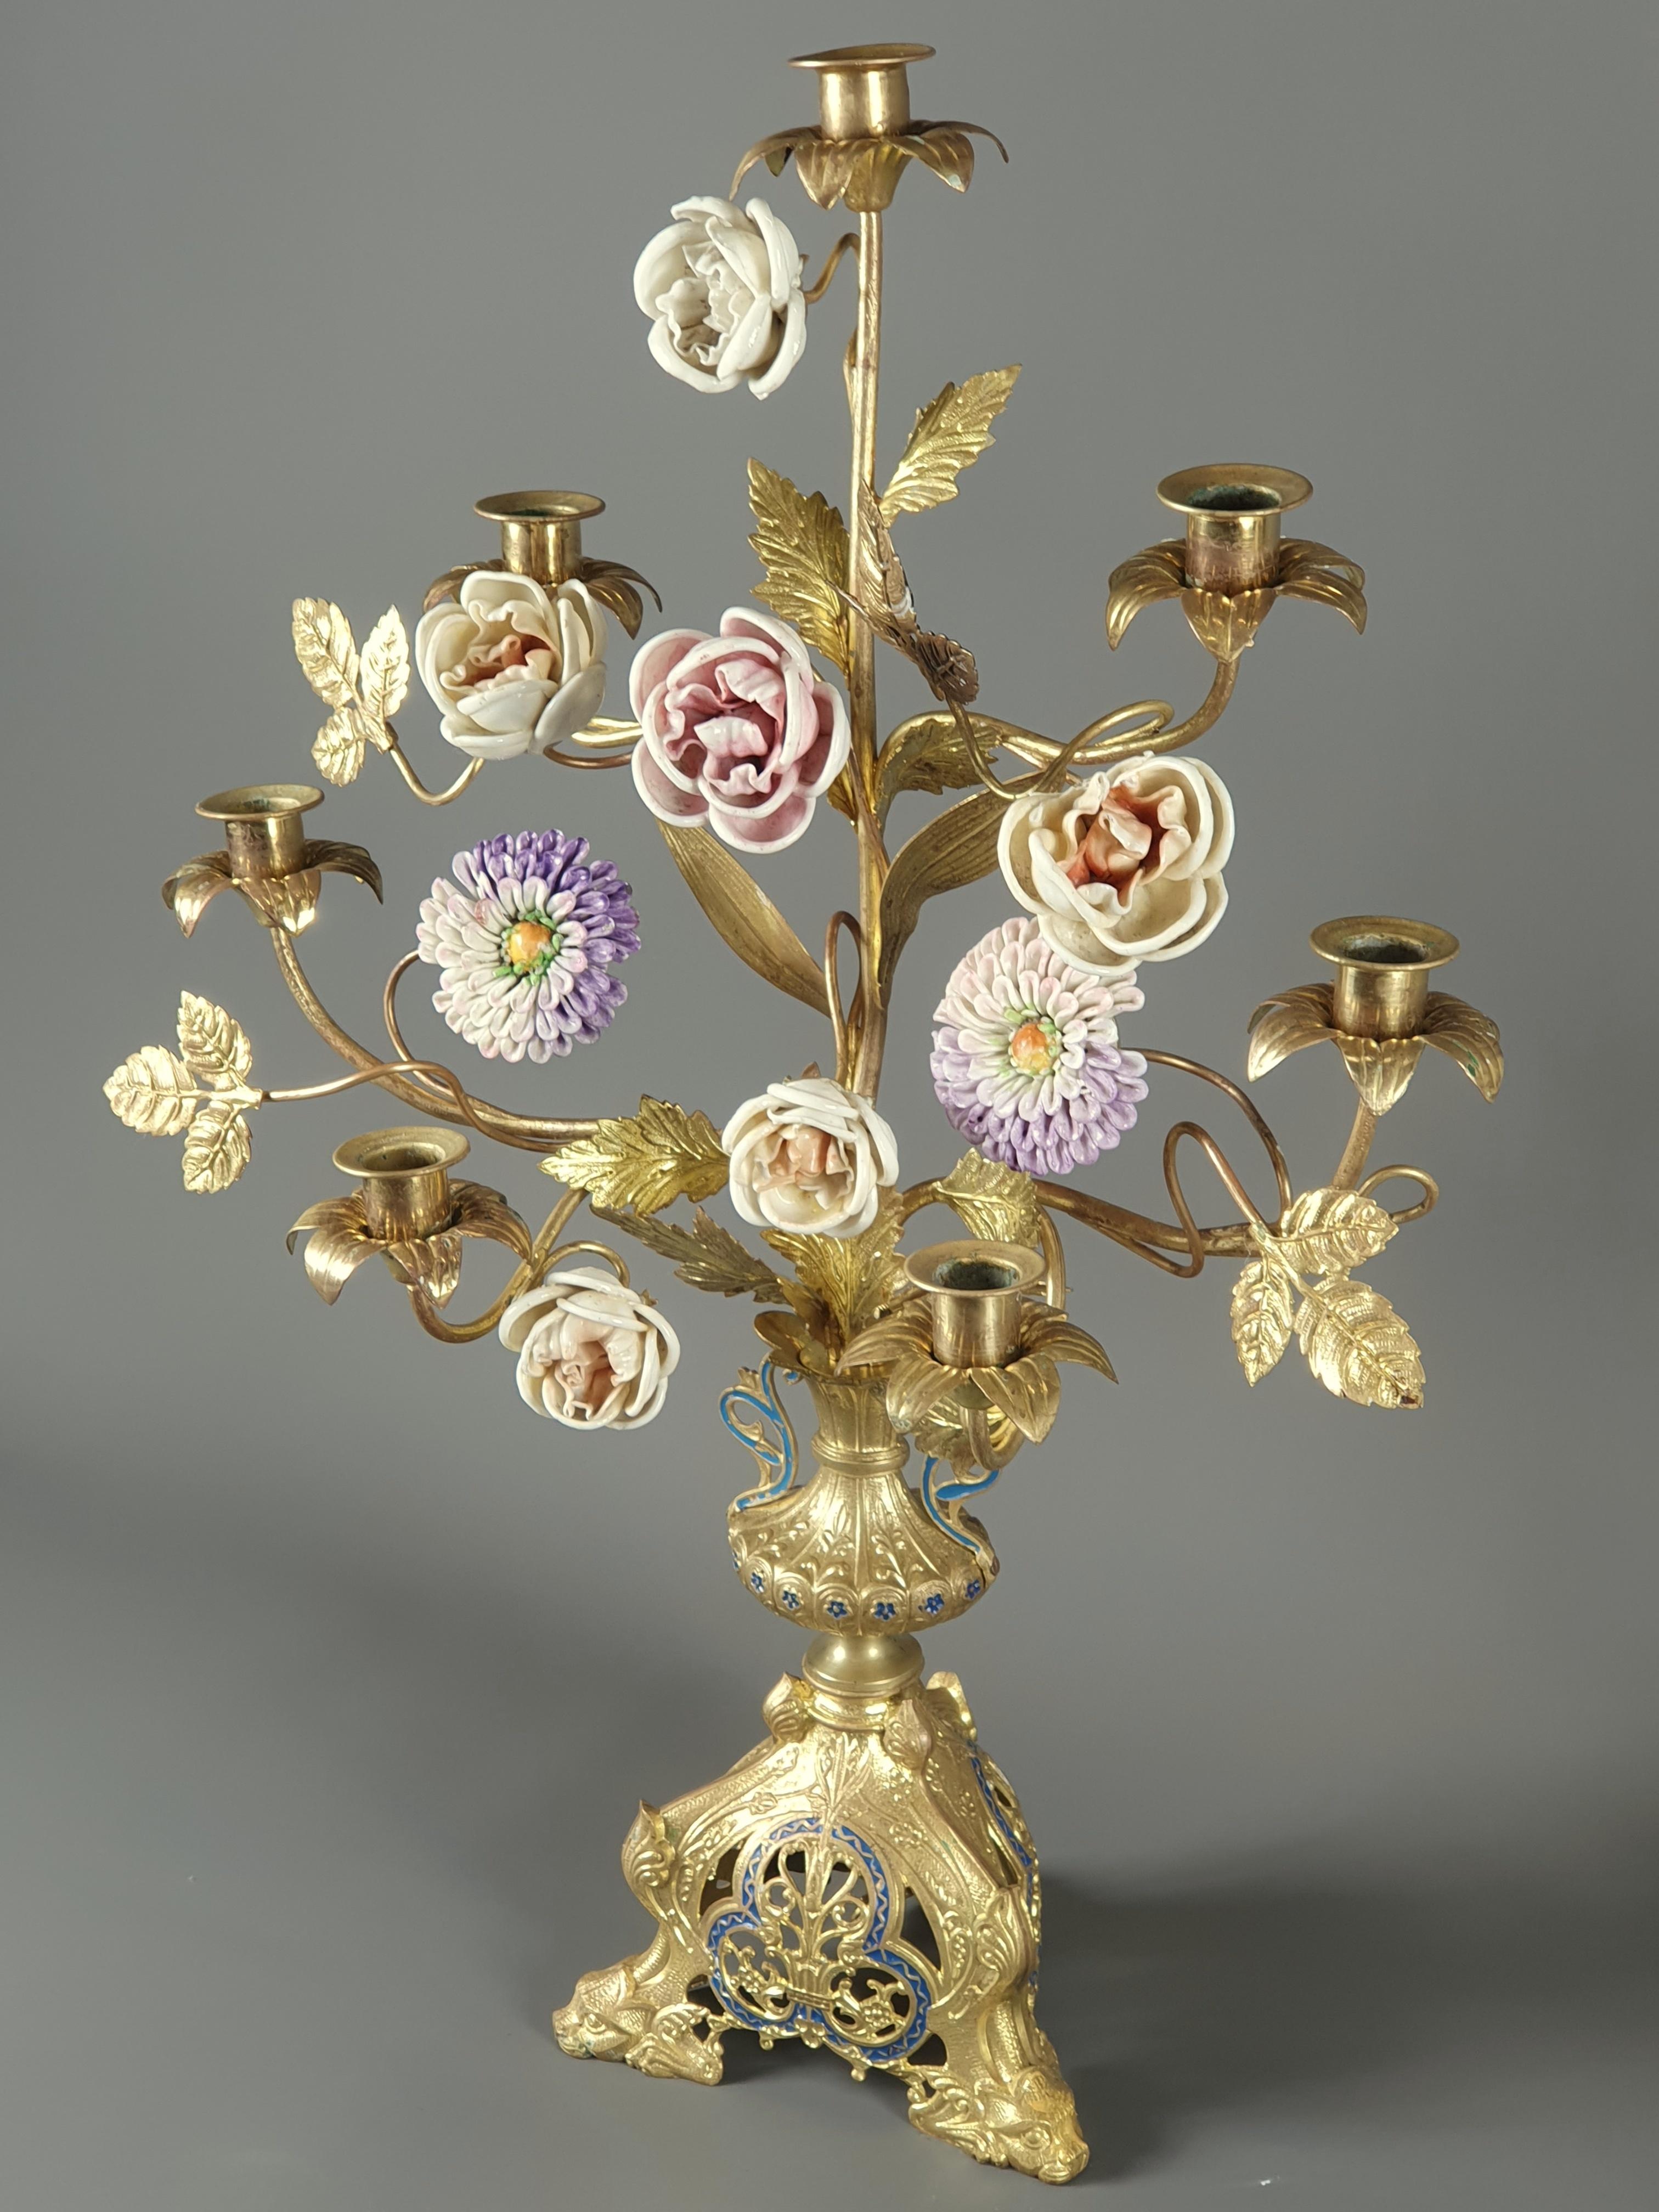 Pair of large candlesticks with seven arms of light in gilded bronze and royale blue rechampi.

Rich vegetal and floral decoration composed of polychrome porcelain branches and flowers.

Very finely crafted tripod base.

19th century